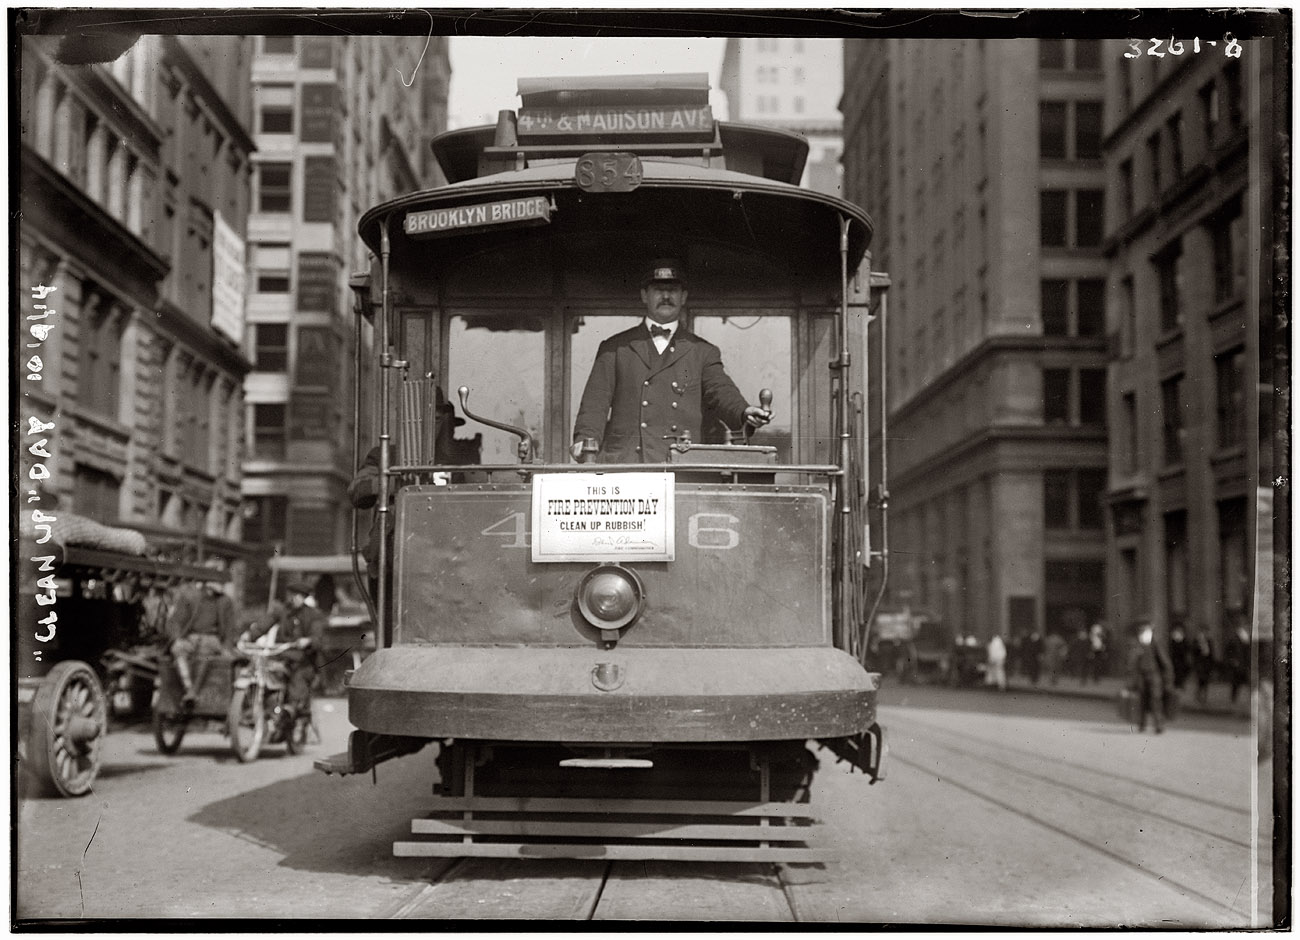 "Clean Up Rubbish" notice on 4th and Madison Avenue streetcar, New York. October 1914. View full size. George Grantham Bain Collection.